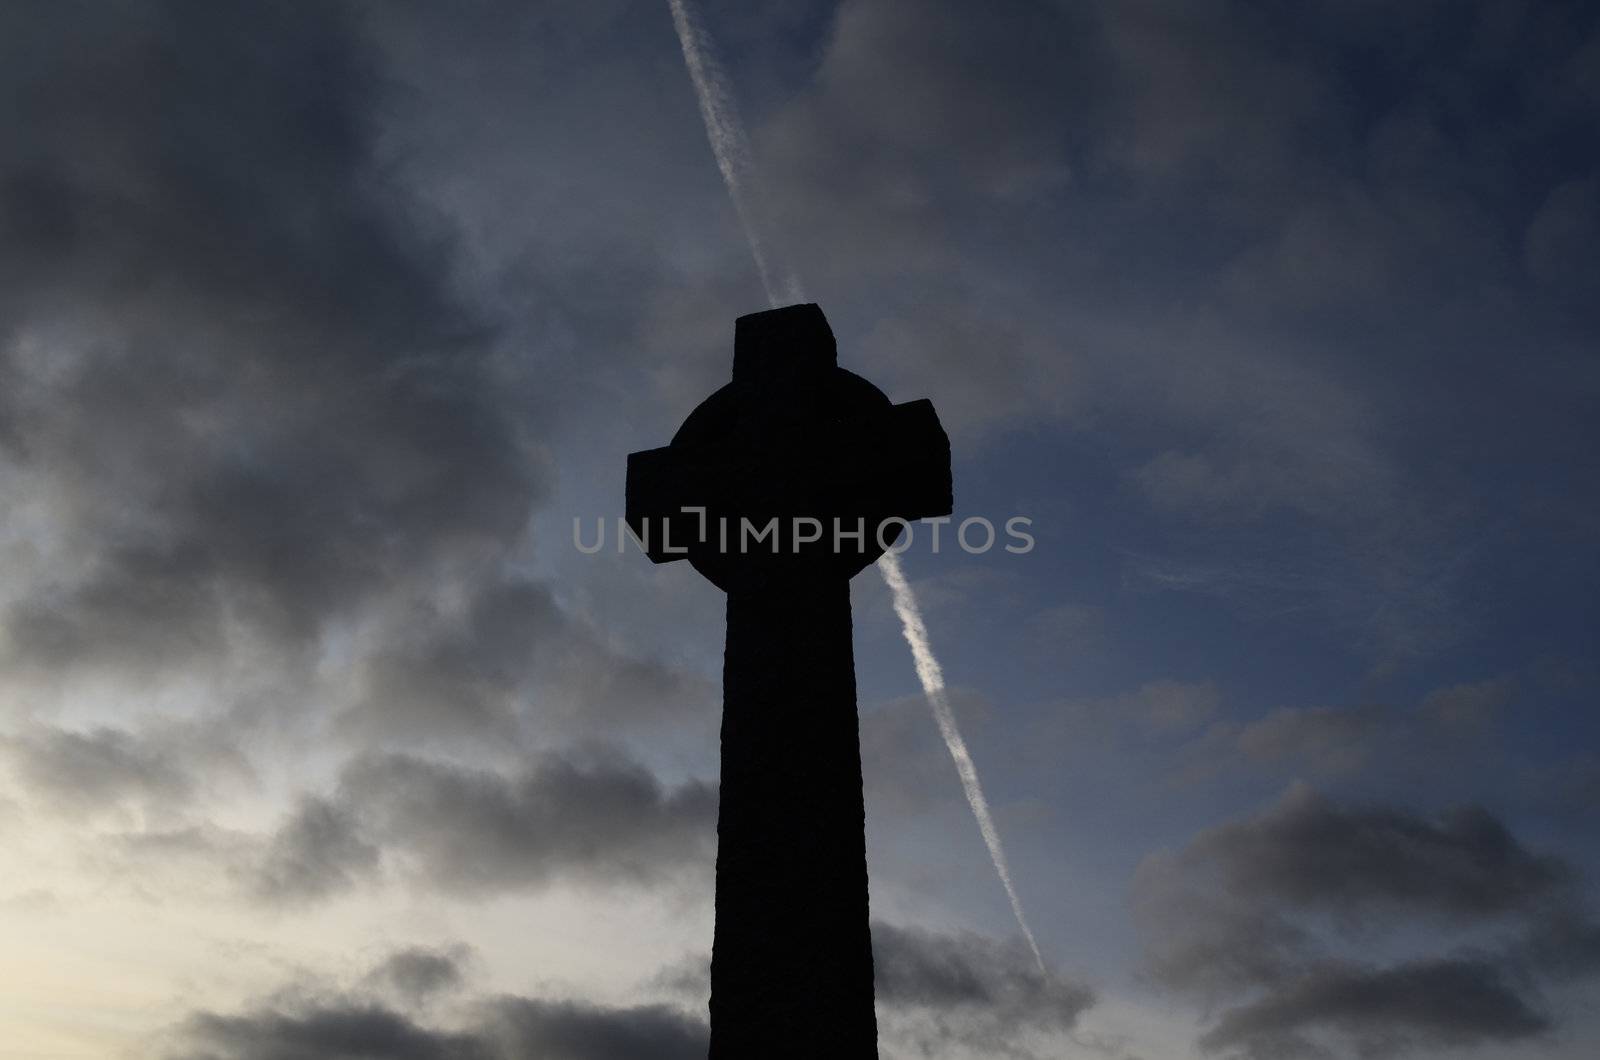 Sillouette of cross against coudy sky with airoplane trail